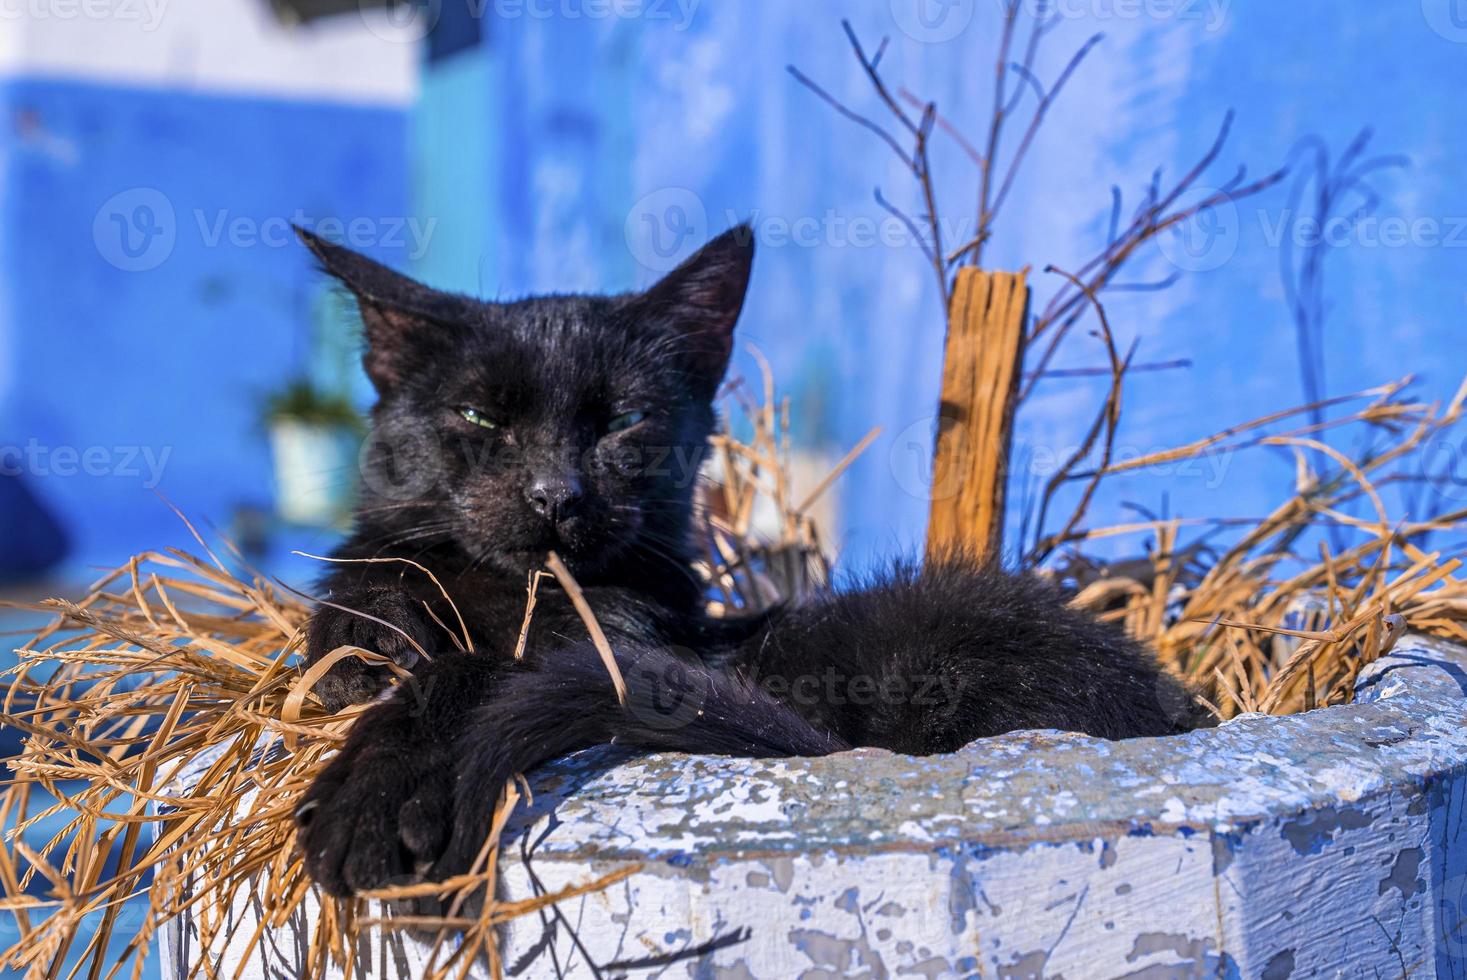 Stray cat relaxing on straw grass under concrete structure photo